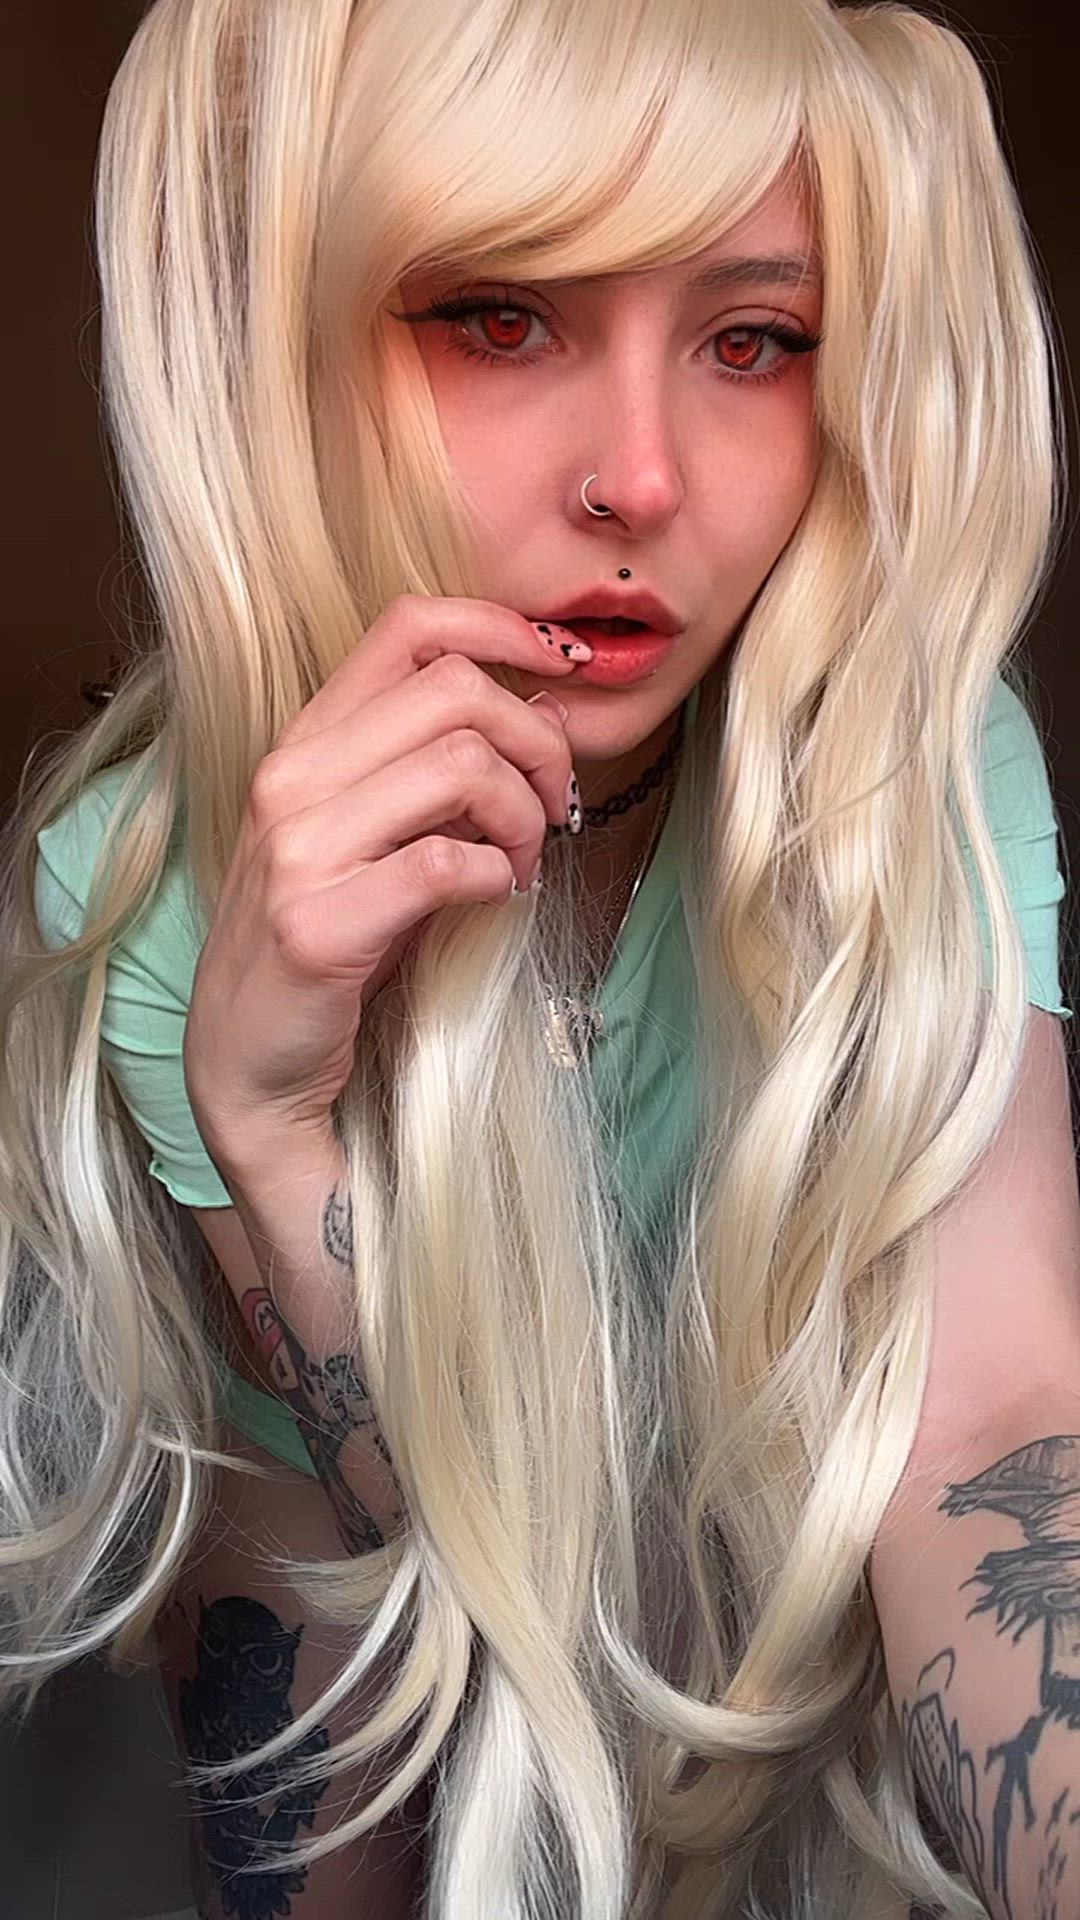 Ass porn video with onlyfans model Baby Brooks🌸 <strong>@babybrooks_sgh</strong>